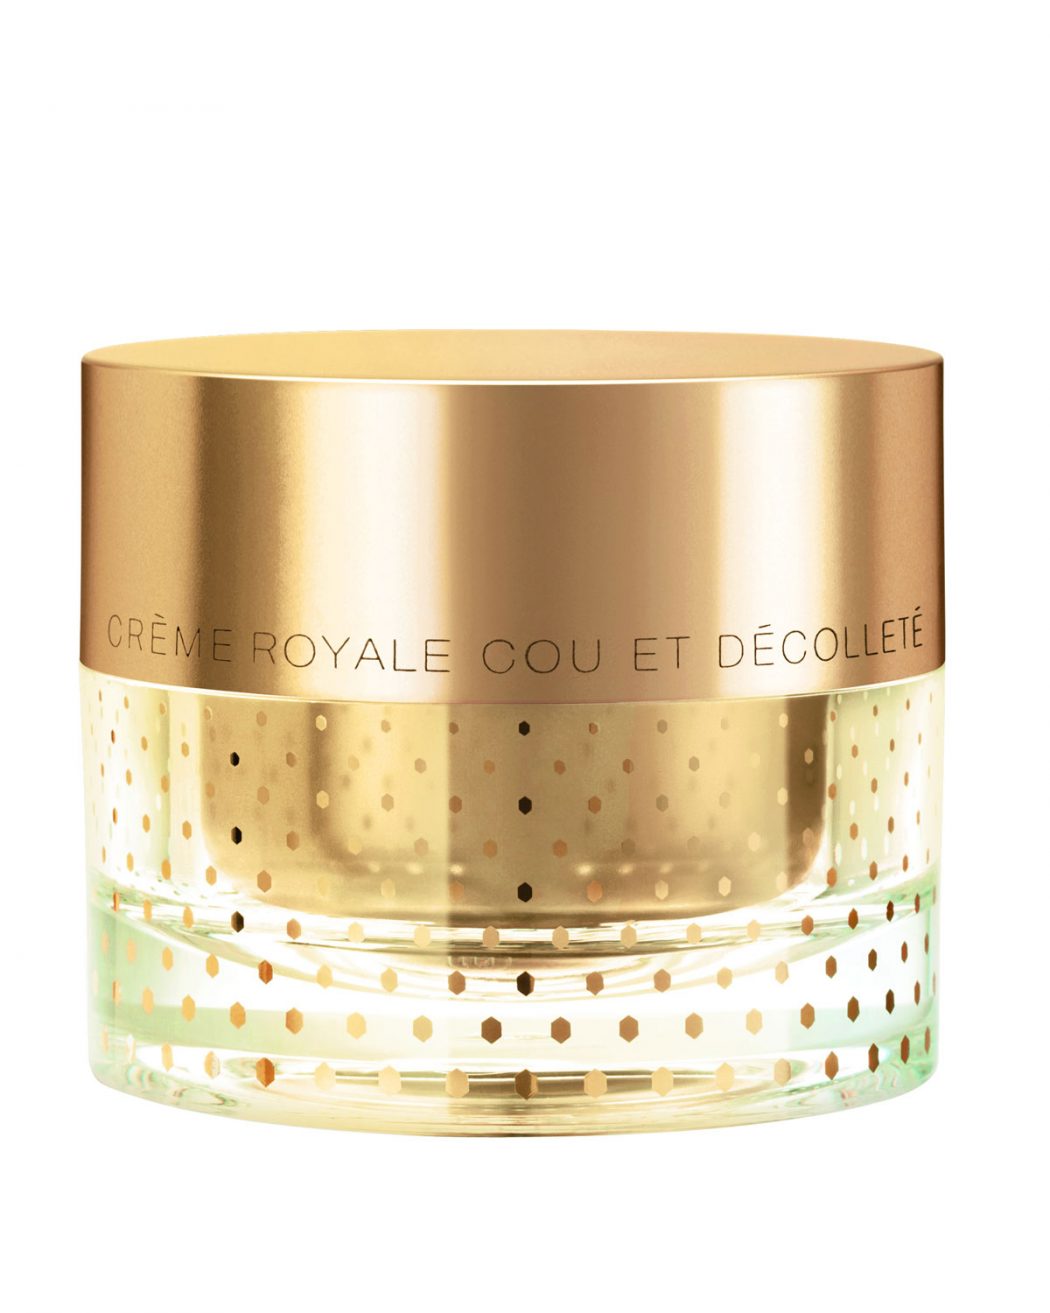 Creme Royale Orlane1 Top 5 Most Expensive Face Creams - 20